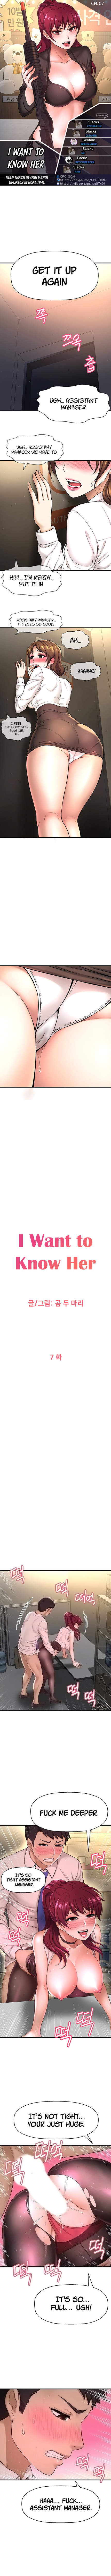 i-want-to-know-her-chap-7-0